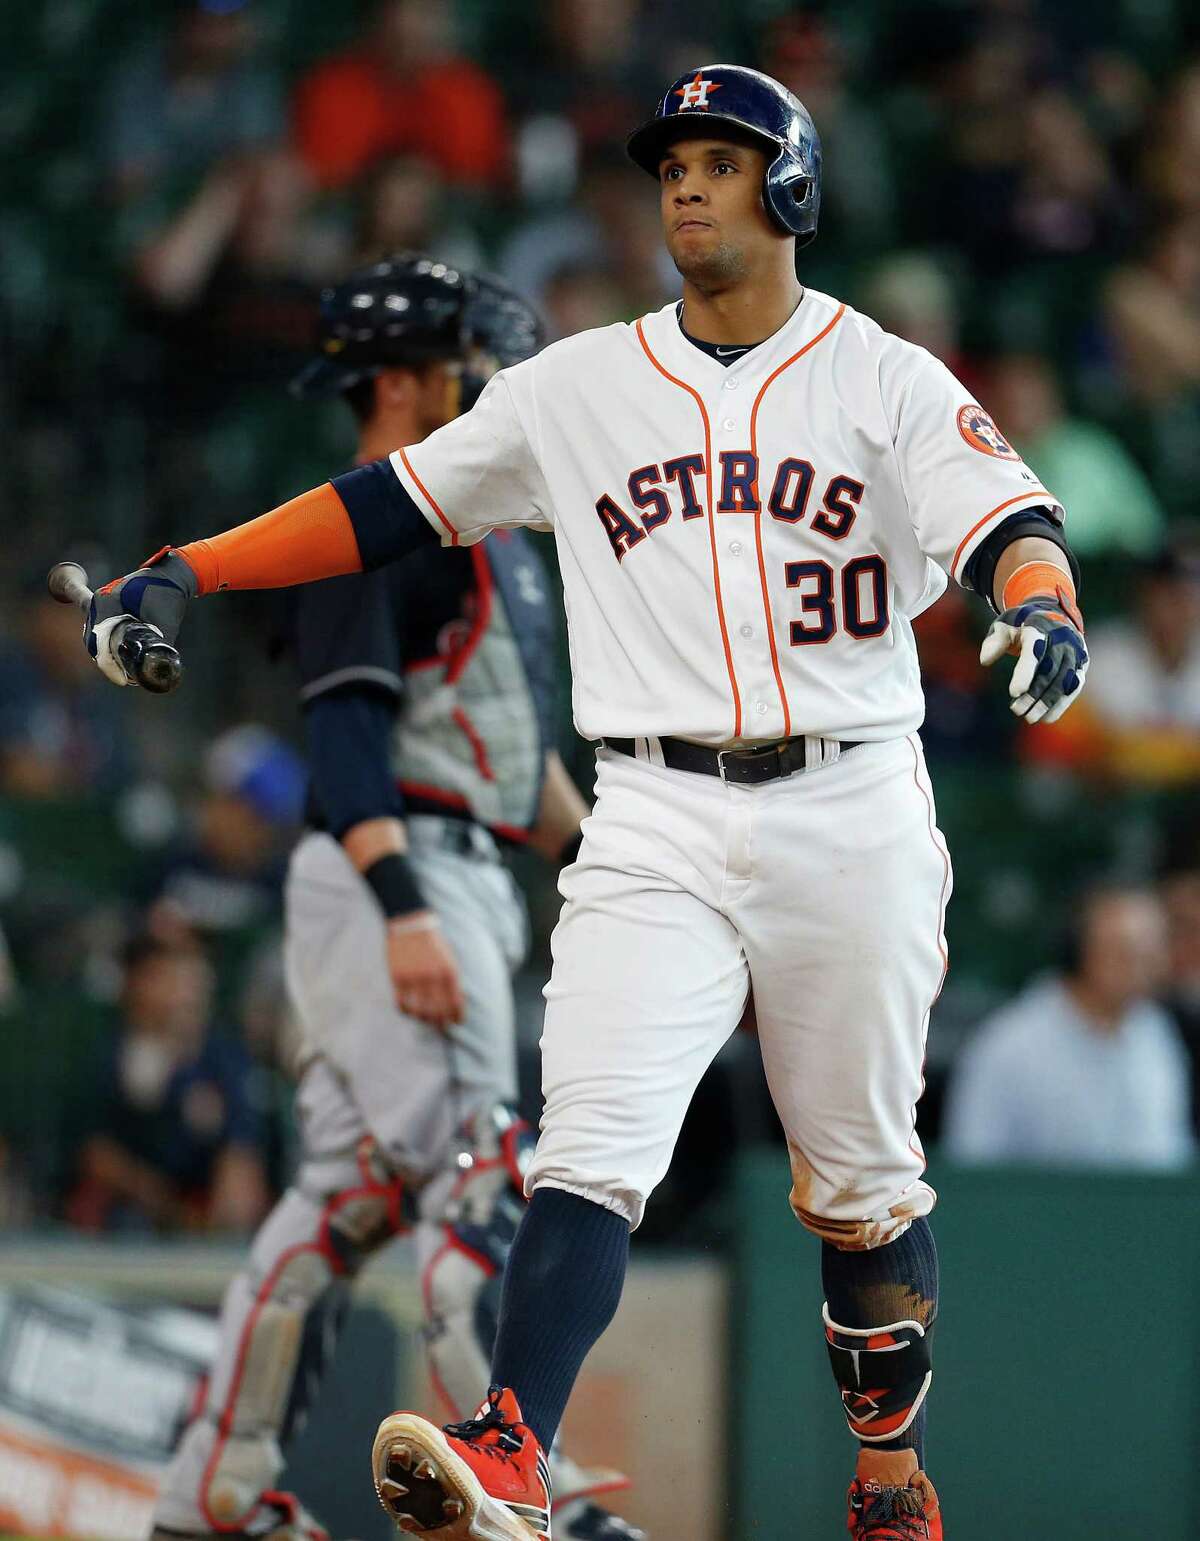 Carlos Gomez last played for the Astros on May 15 at Boston. He will be activated before Tuesday's game at Arizona.